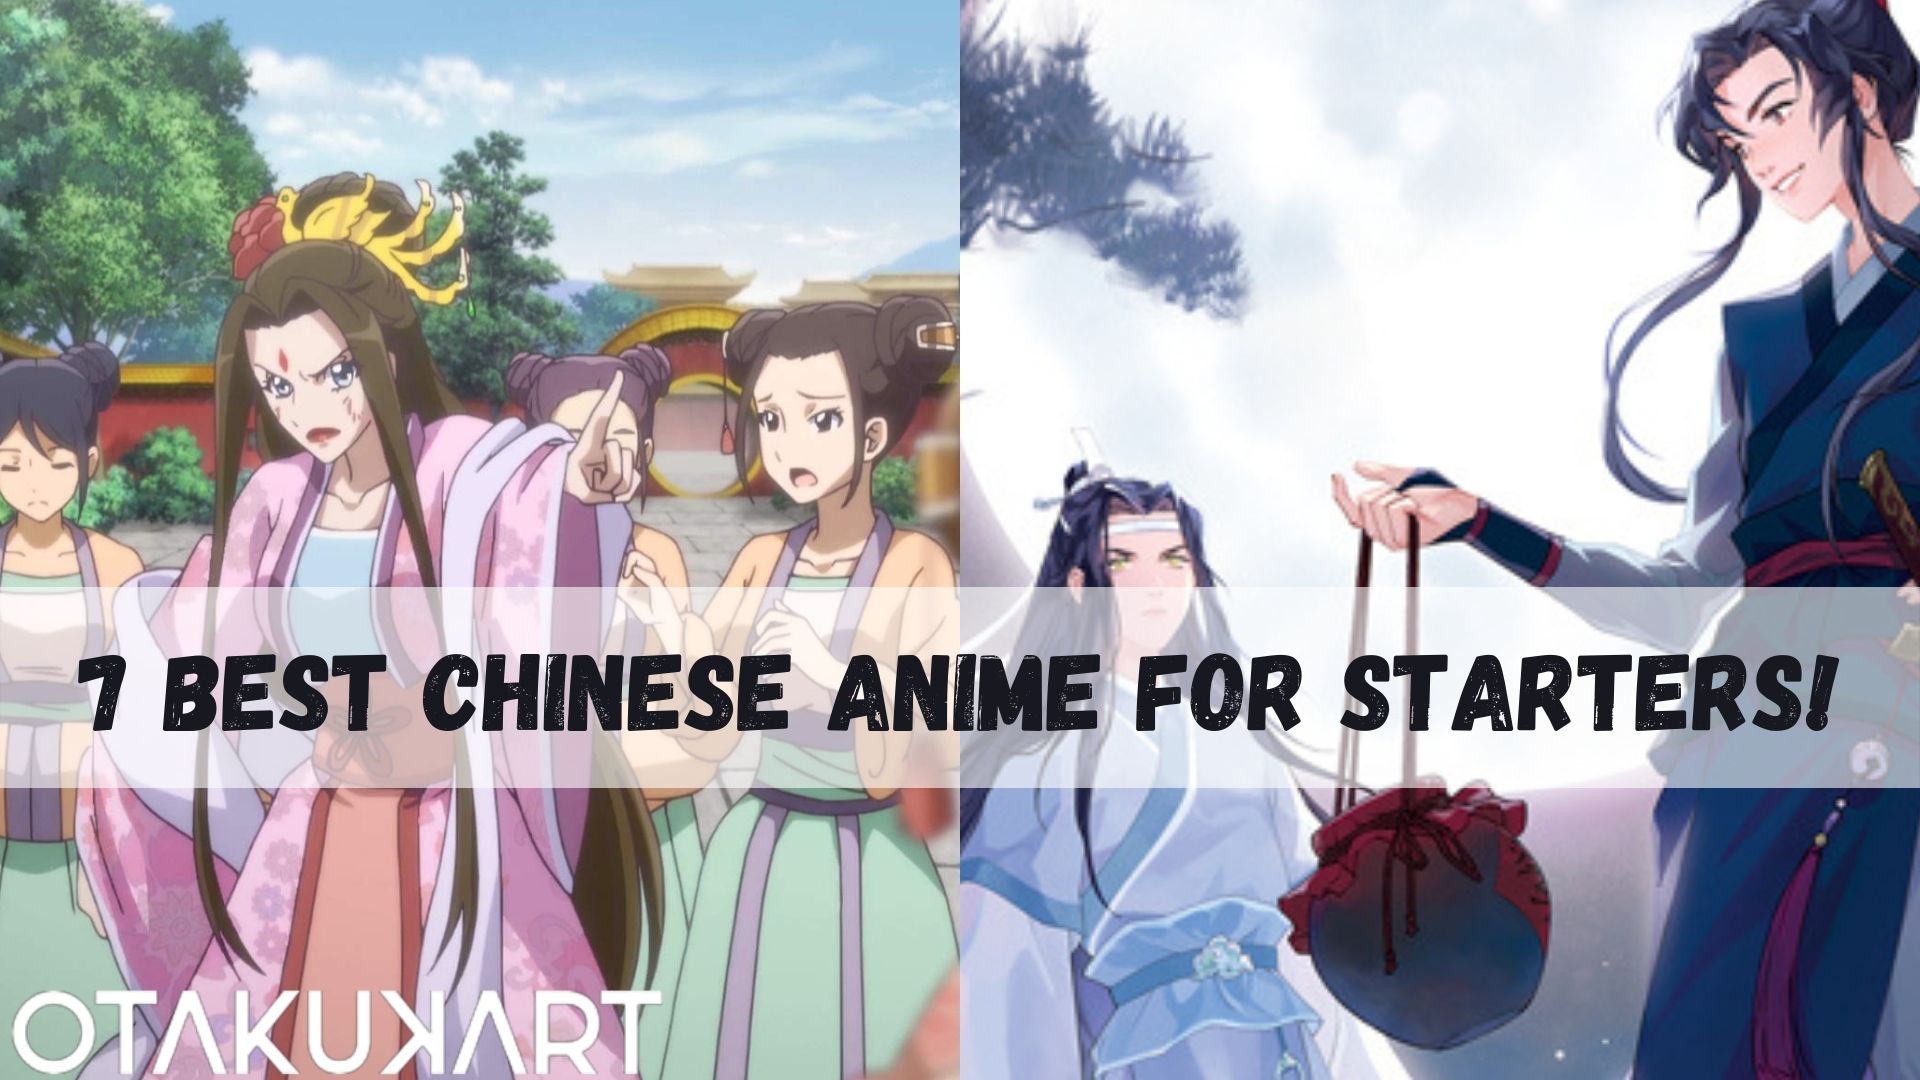 Best Chinese Anime For Starters!